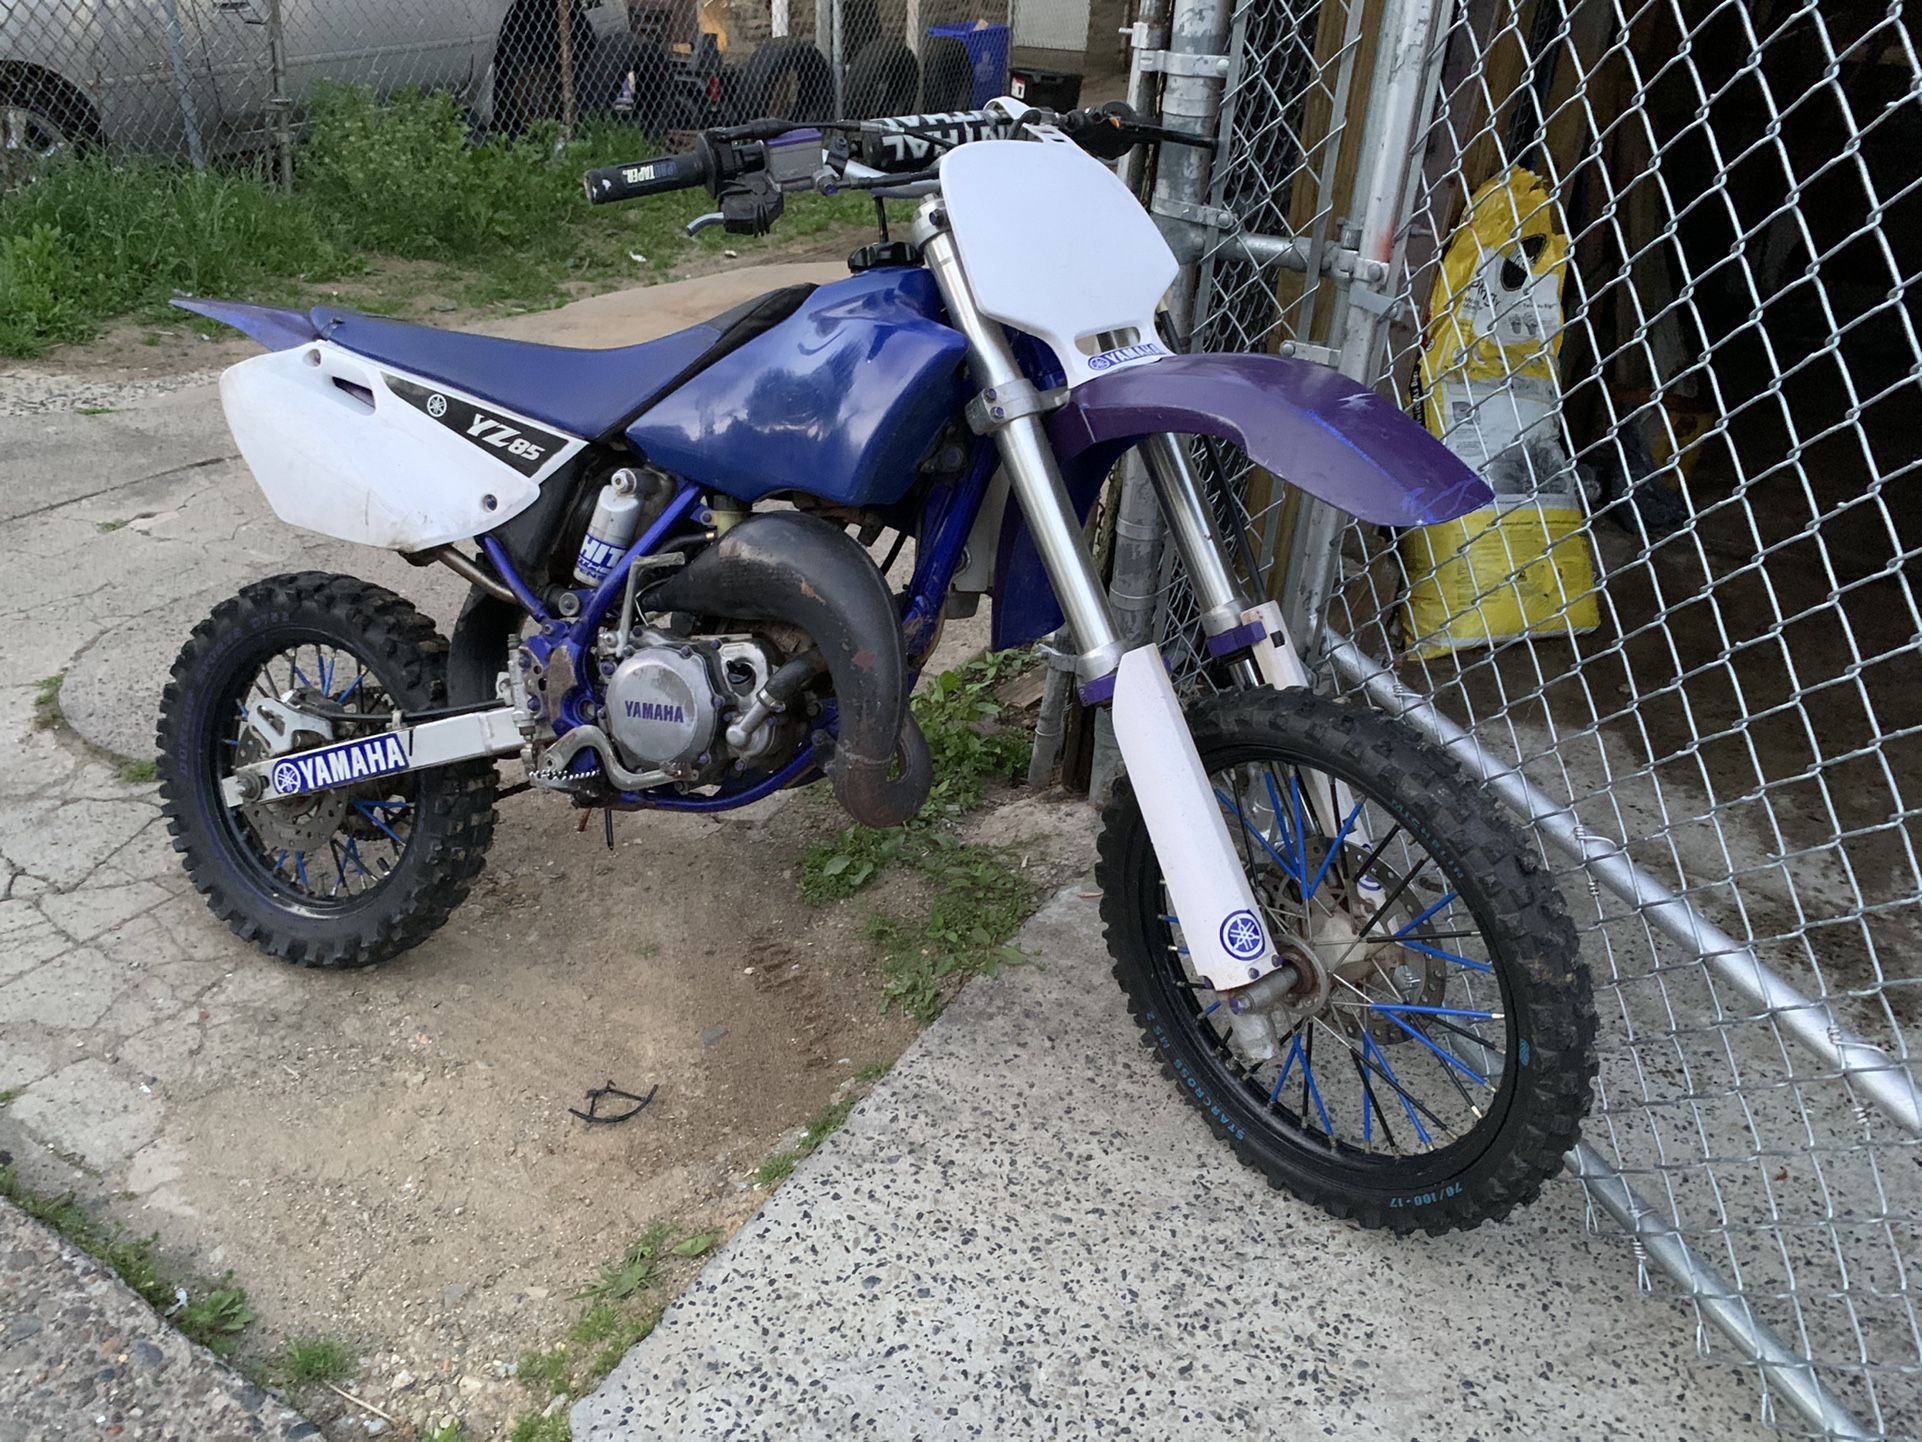 Photo 2005 yz85 Runs Good, Only Problem Is It Leaks gas under the dirtbike the Bikes Comes With Brand new plastics and seat cover and more things